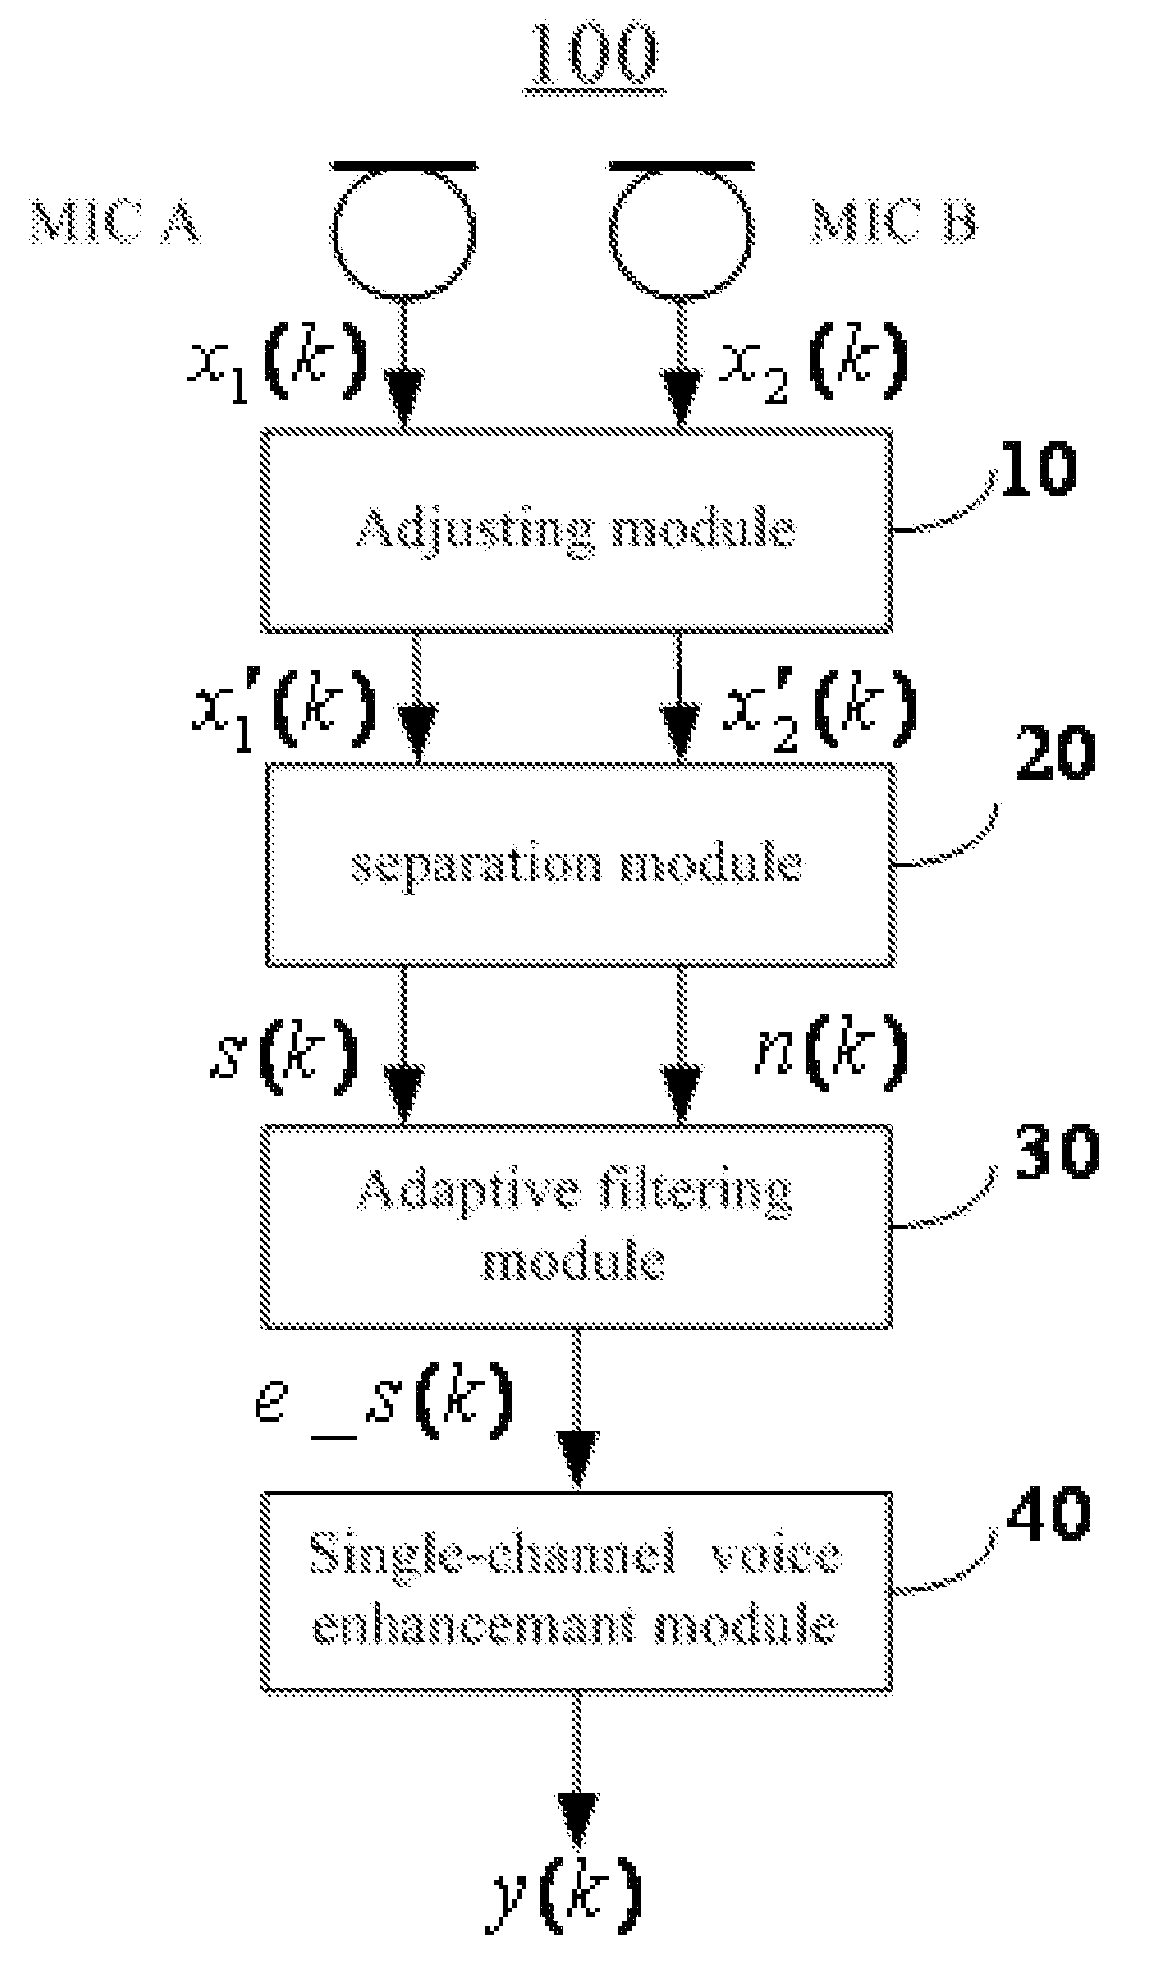 Dual Microphone System and Method for Enhancing Voice Quality